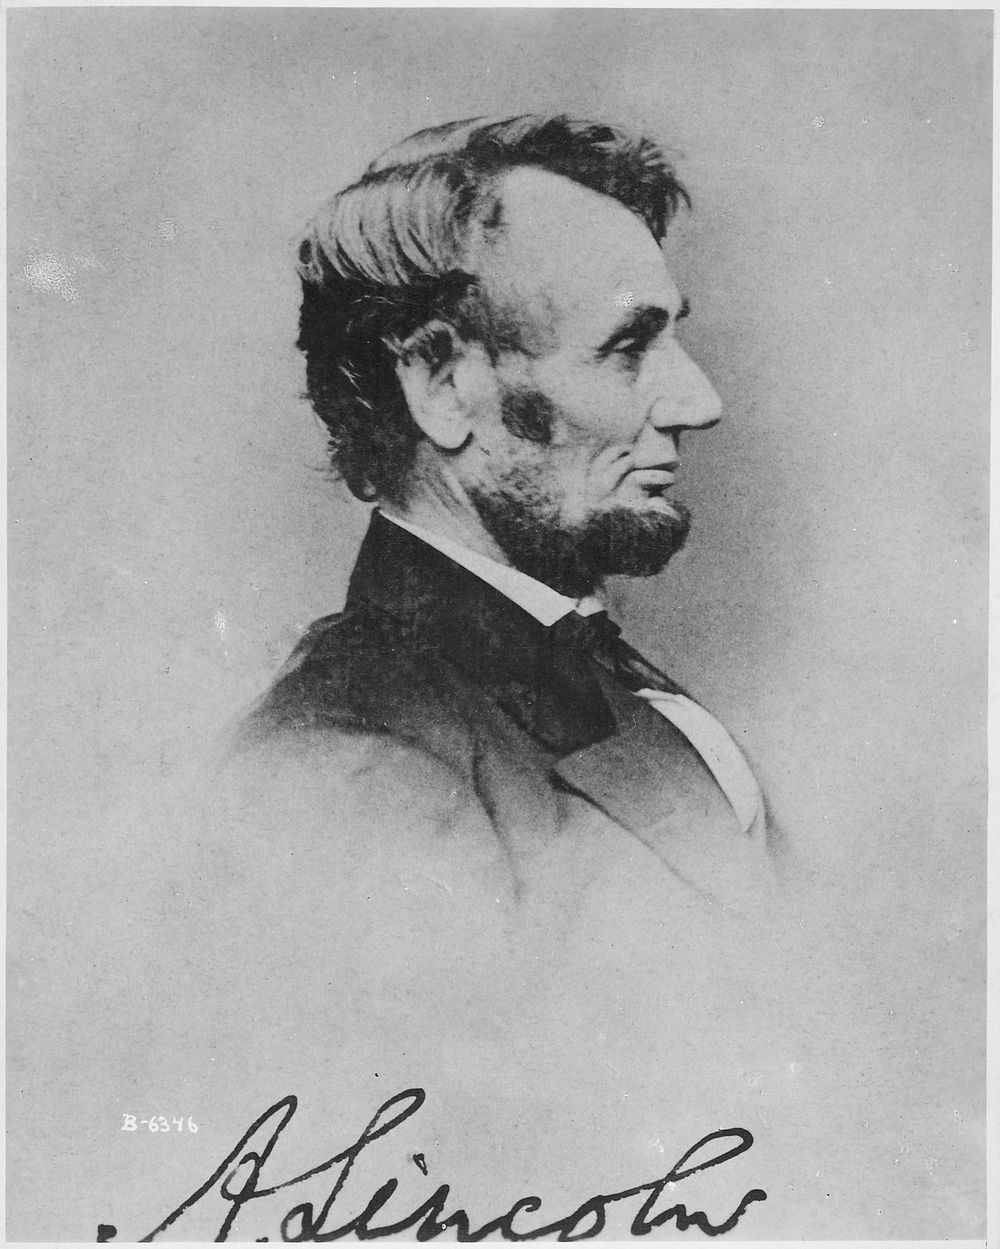 Photograph of President Abraham Lincoln. Original public domain image from Flickr